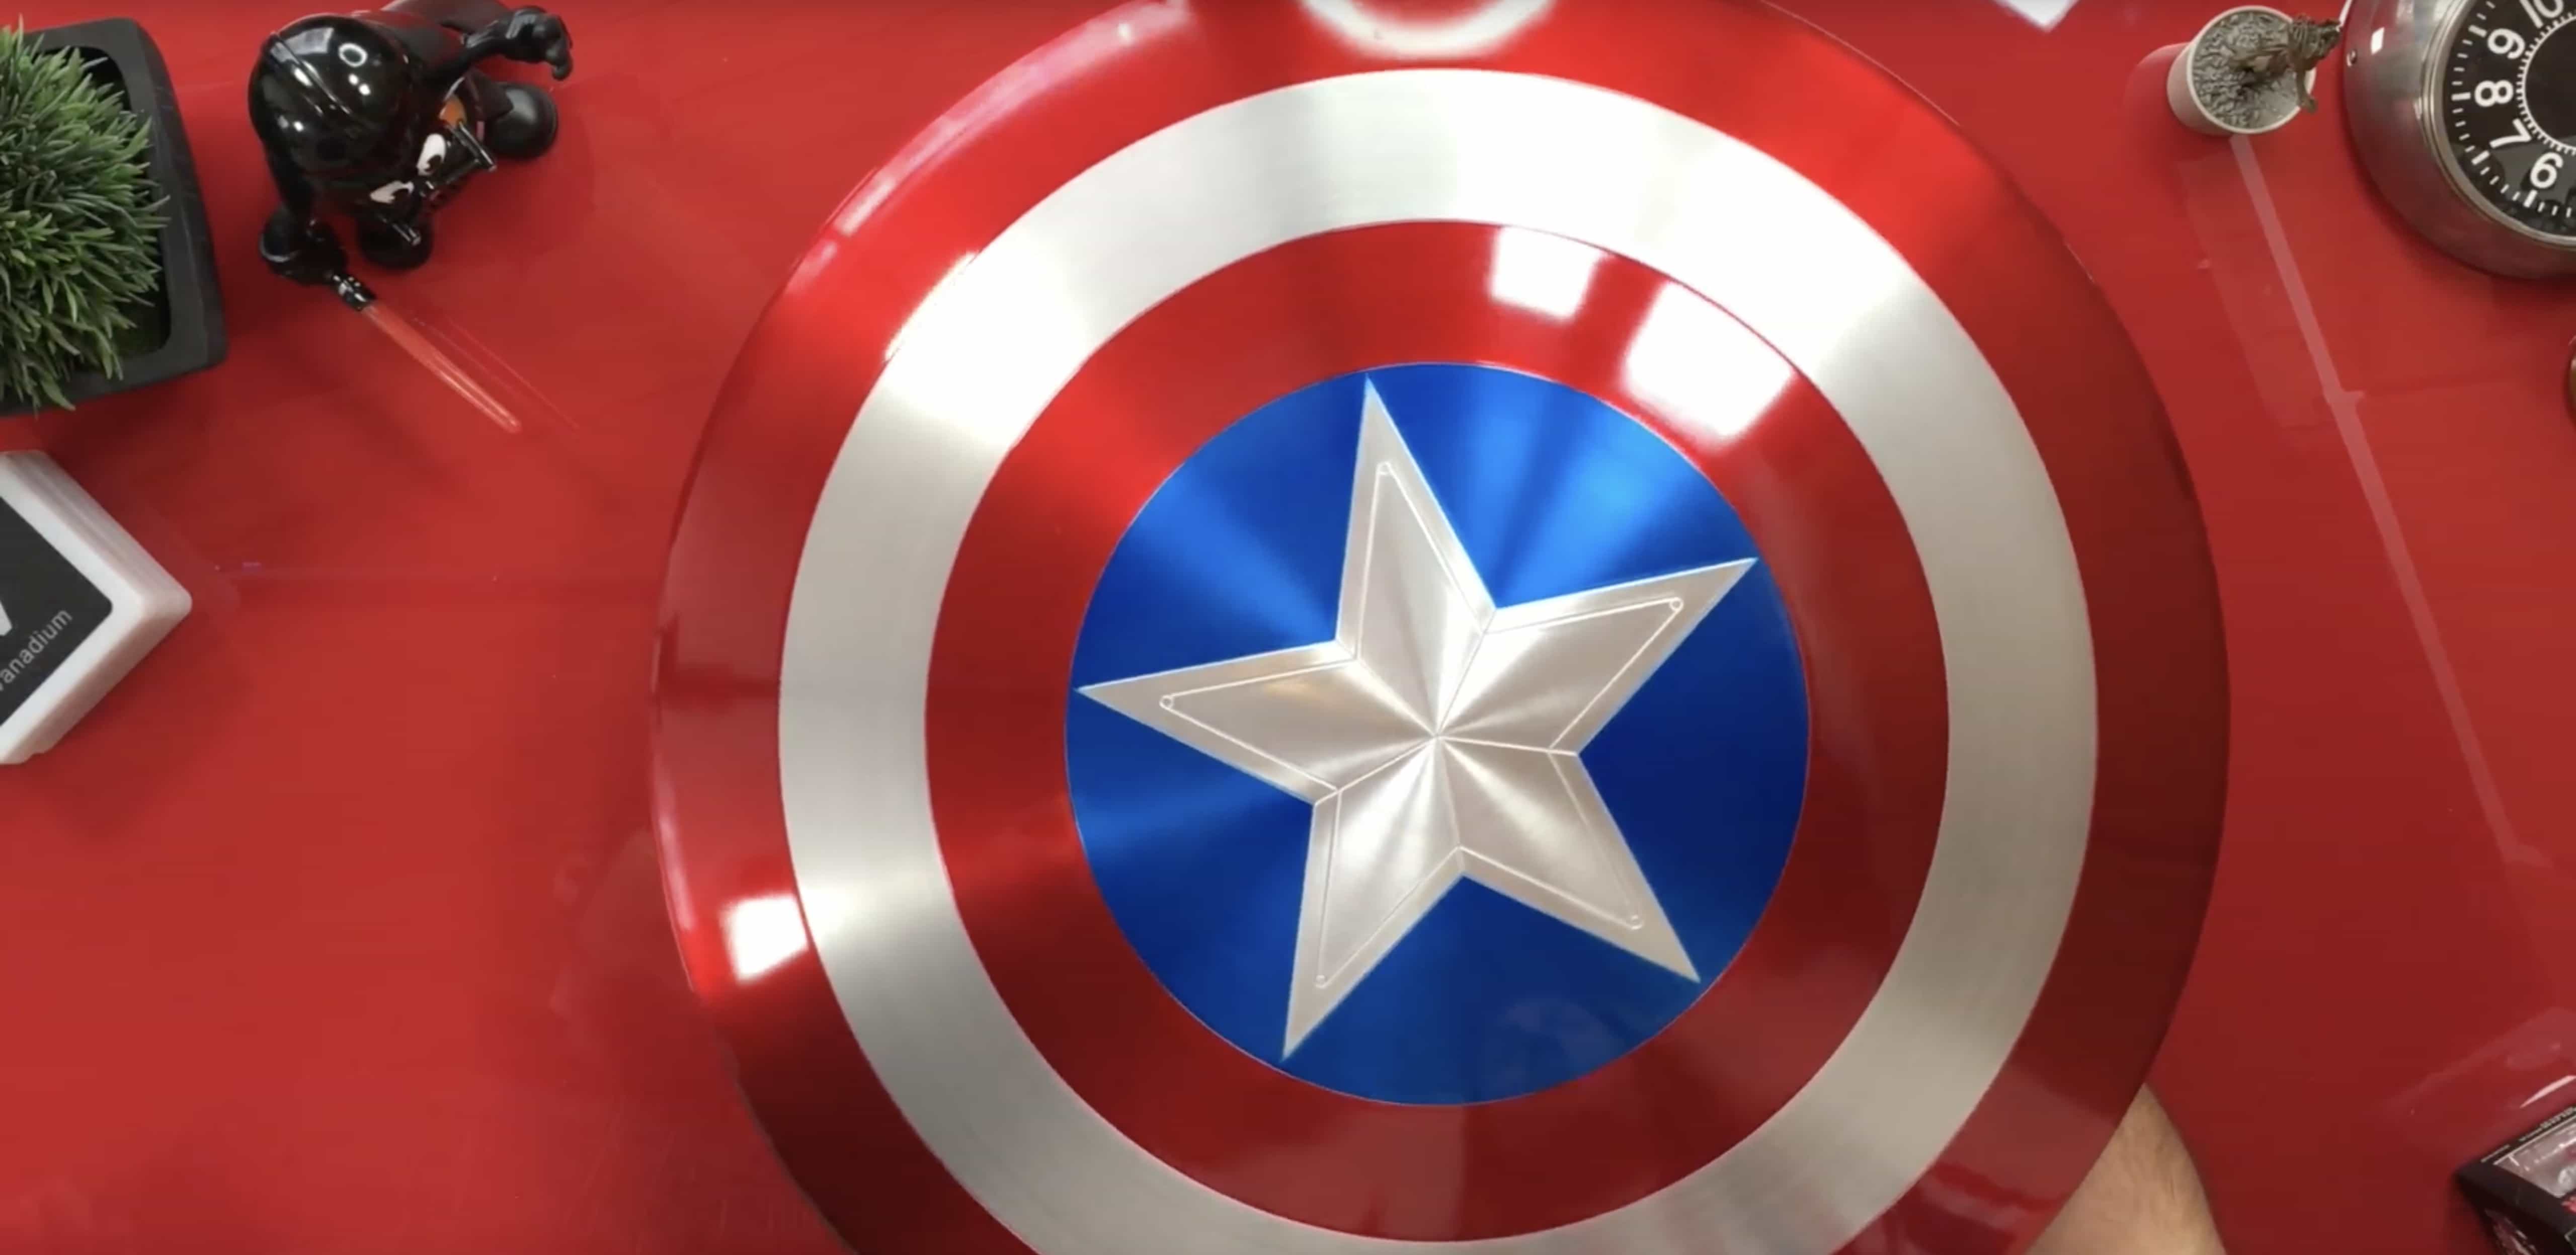 Unboxing the Marvel Legends 75th Anniversary Captain